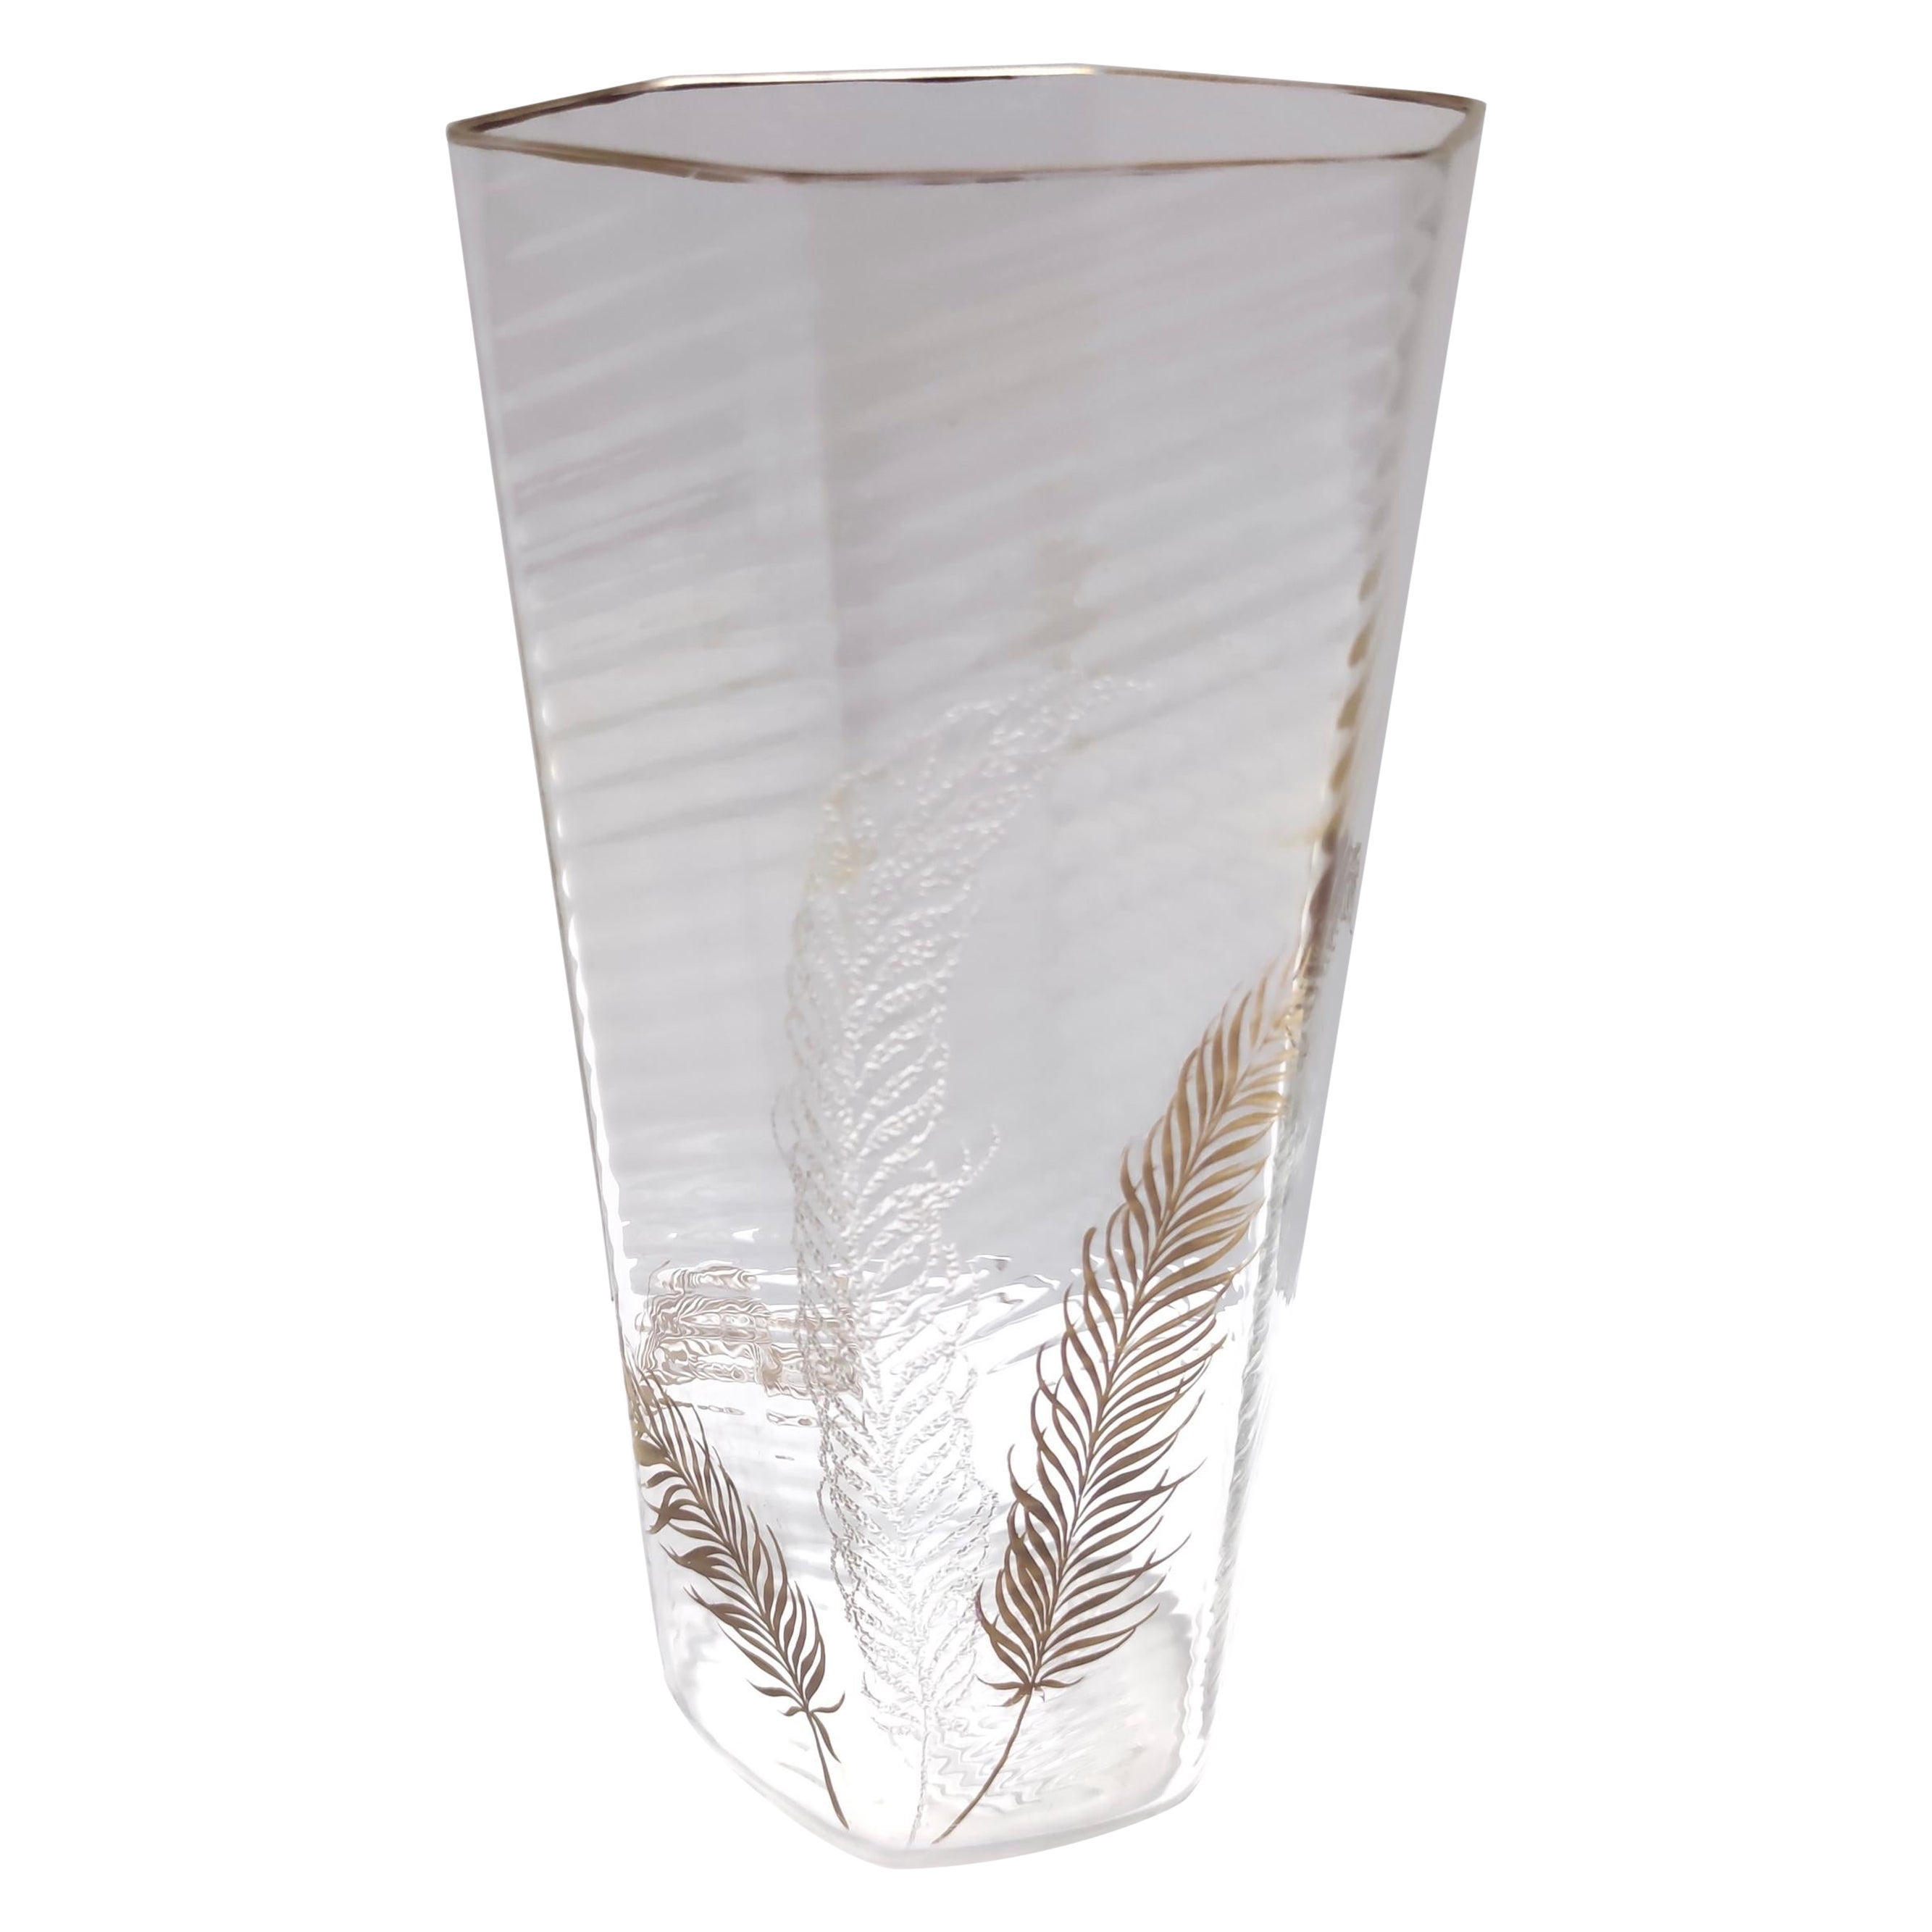 Rare and Elegant Transparent and Gold Hexagonal Murano Glass Vase by Cenedese For Sale